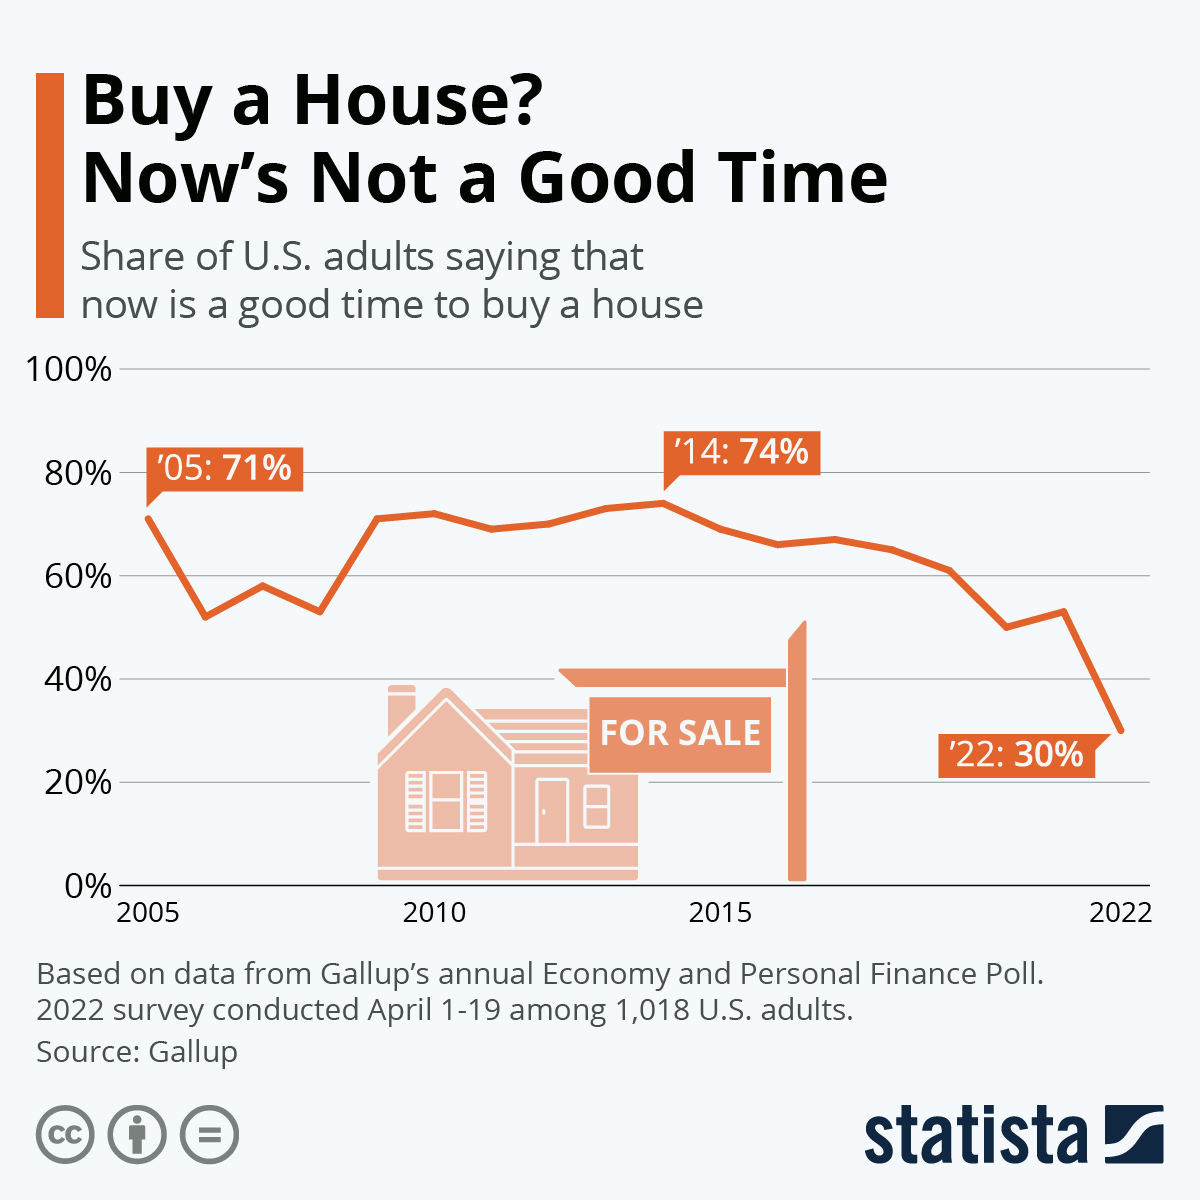 Buy a House? Now's Not a Good Time